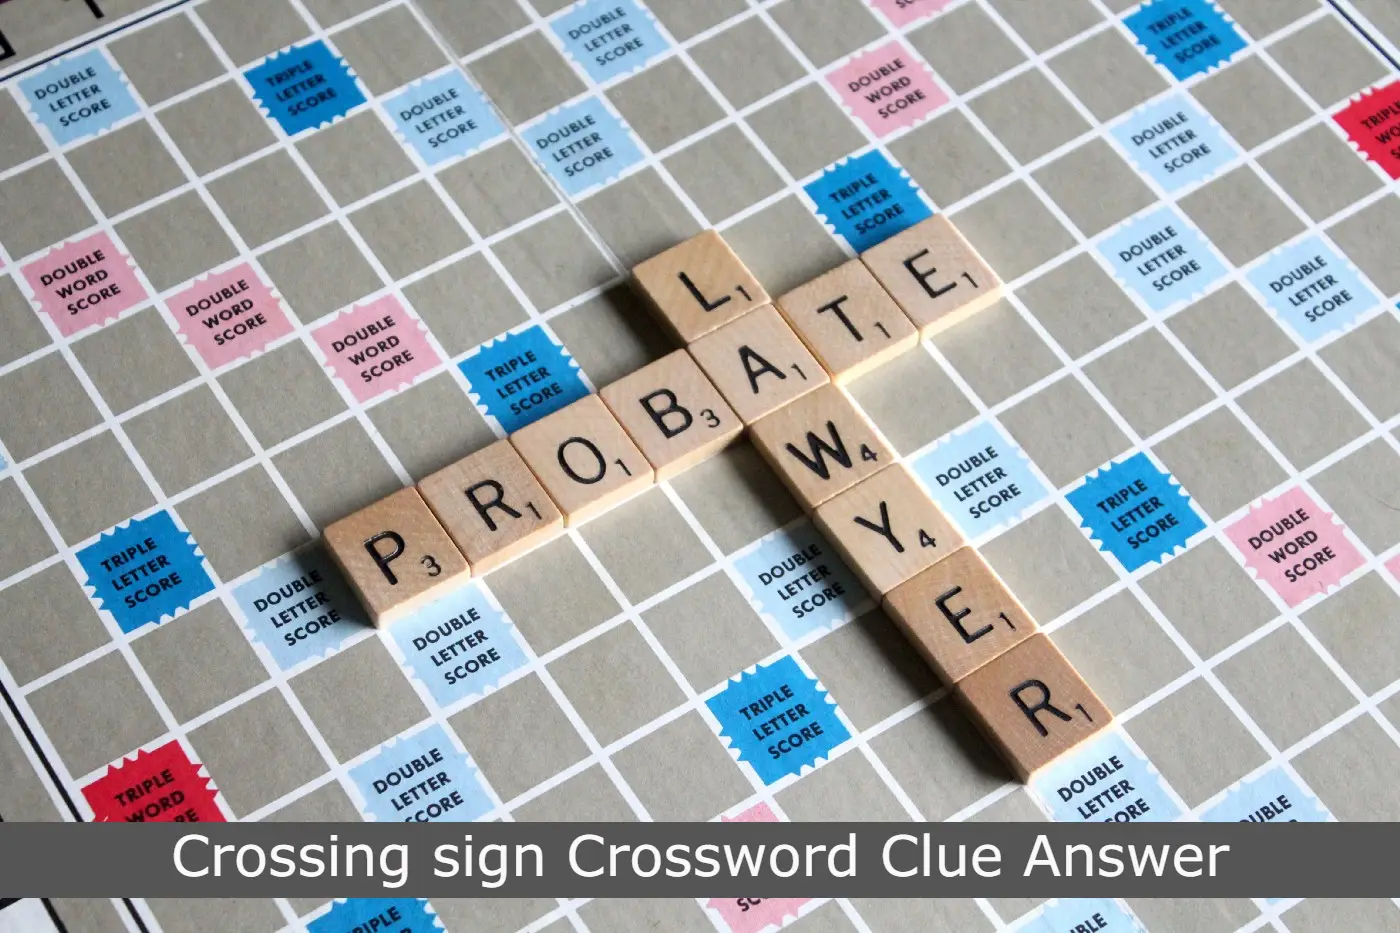 Crossing sign Crossword Clue Answer